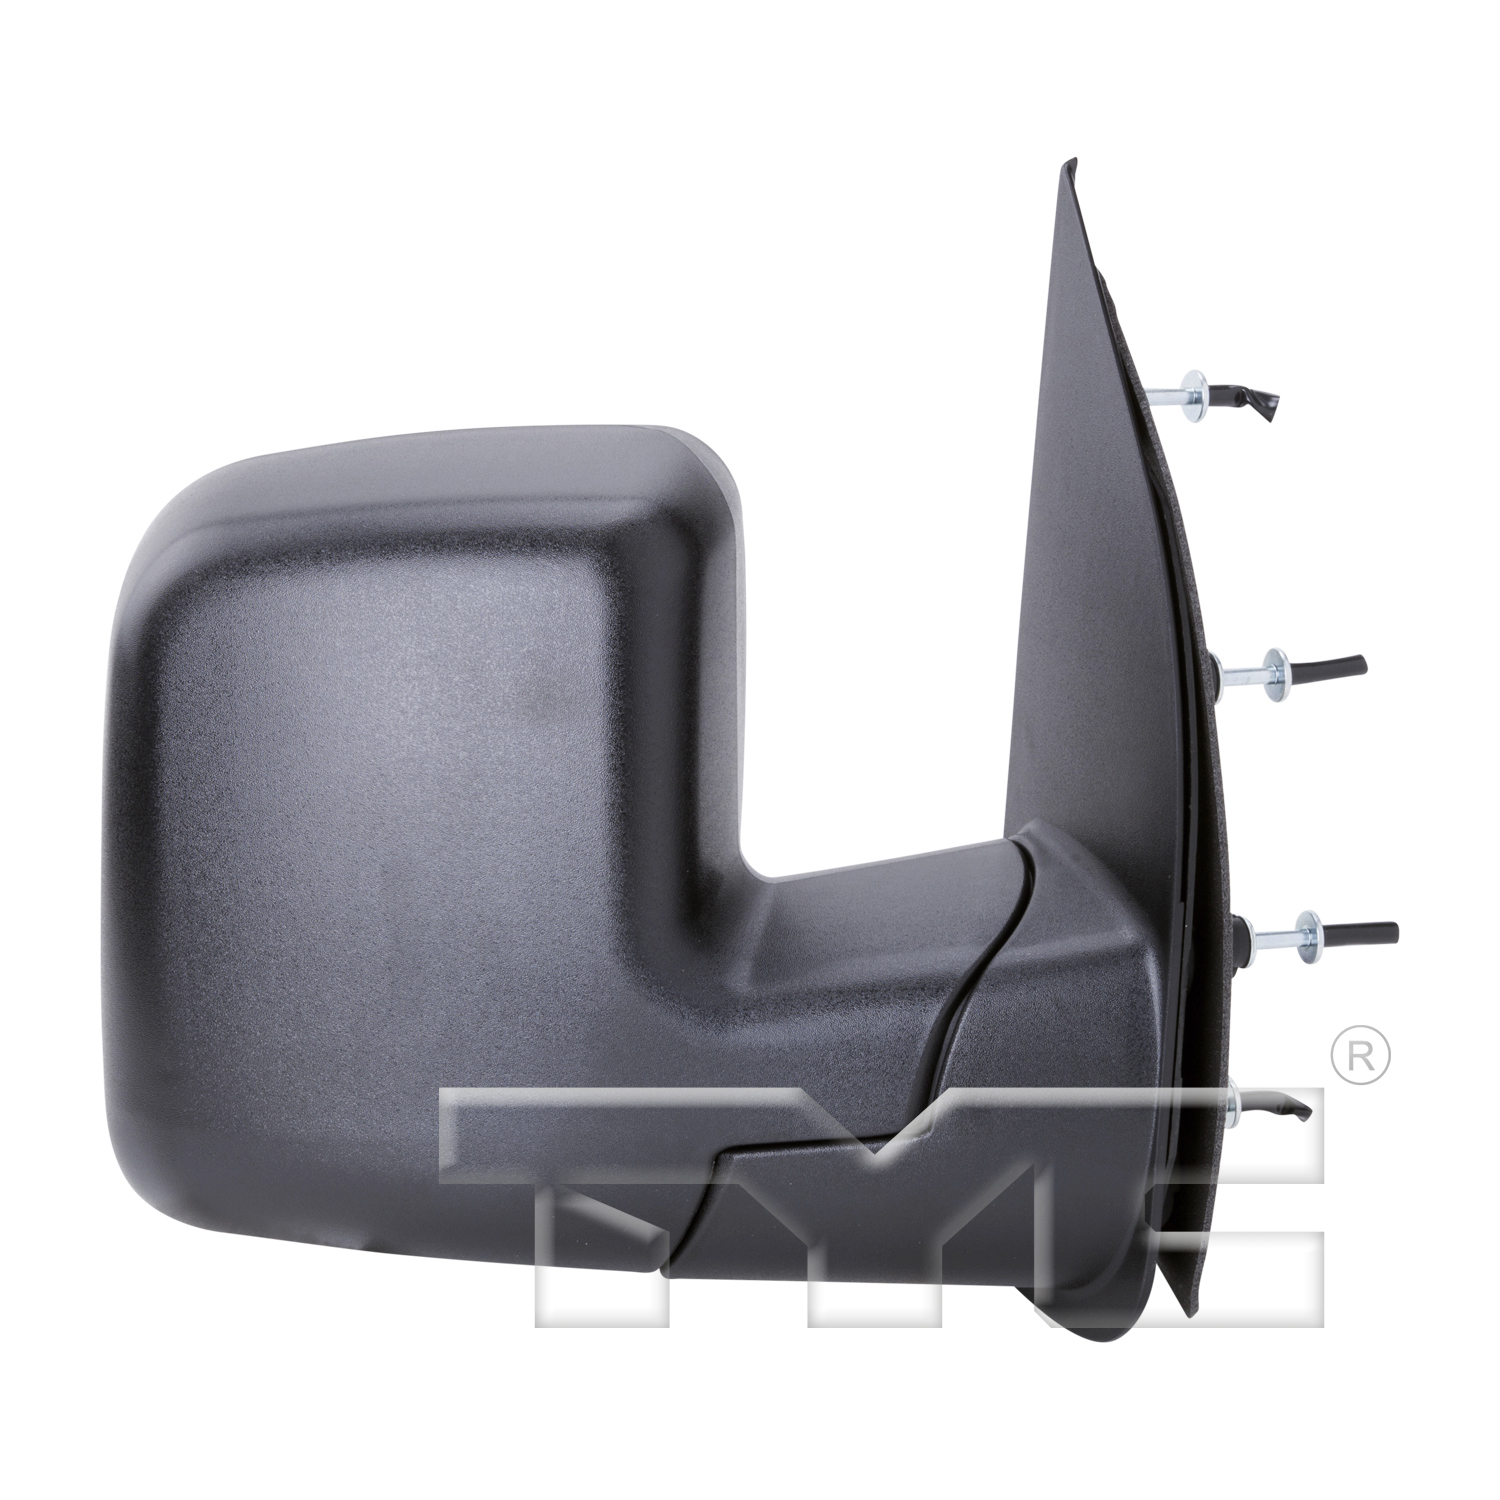 Aftermarket MIRRORS for FORD - E-450 SUPER DUTY, E-450 SUPER DUTY,03-07,RT Mirror outside rear view